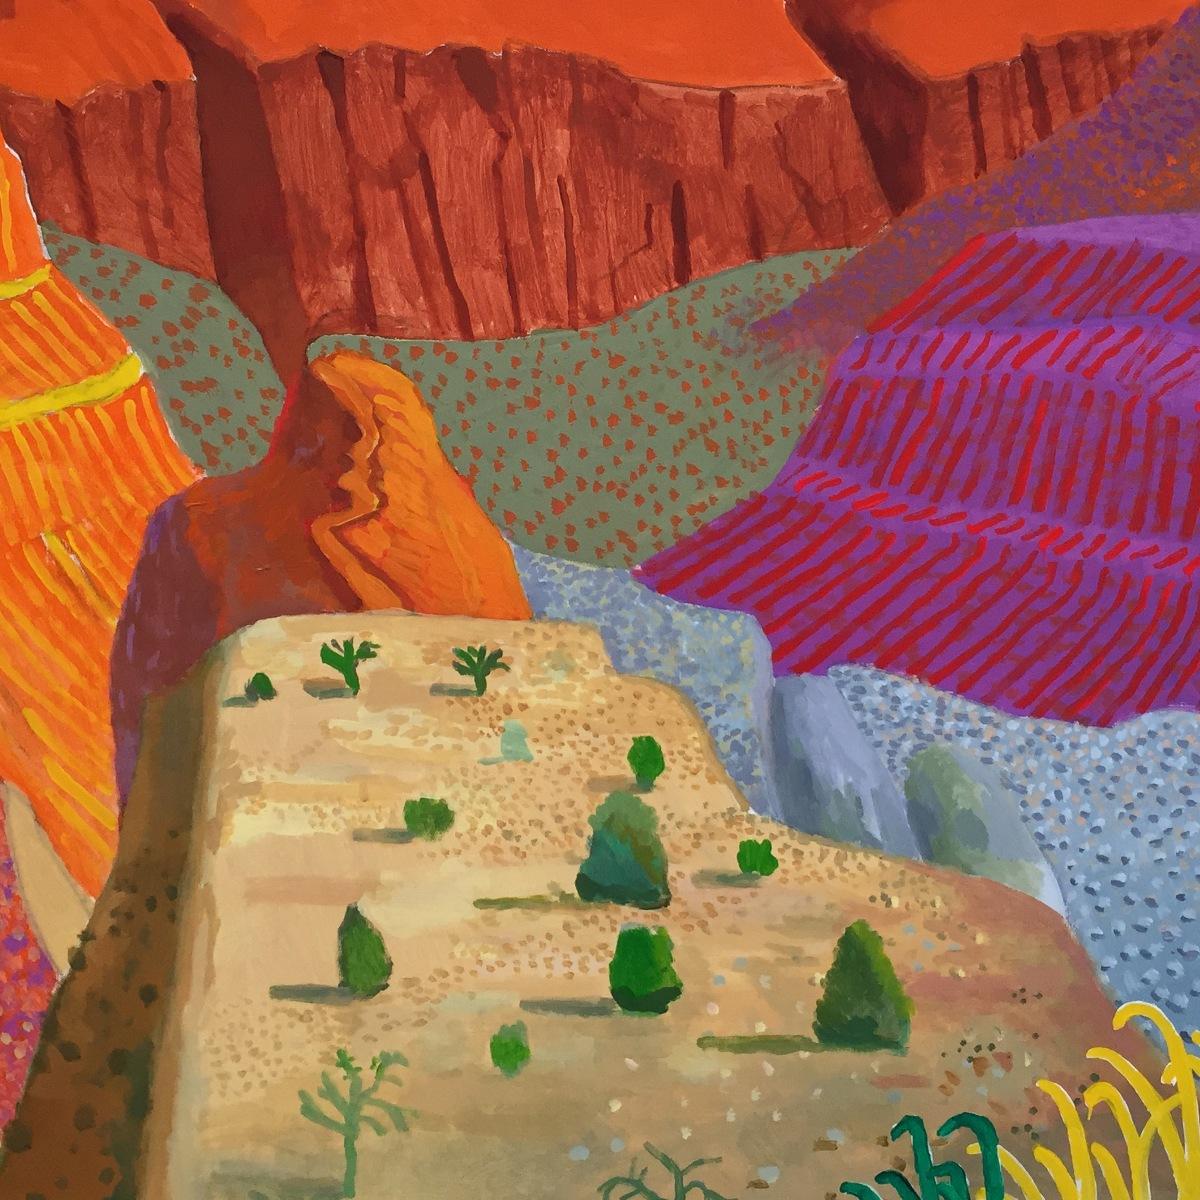 david hockney: something new in painting (and photography) and even